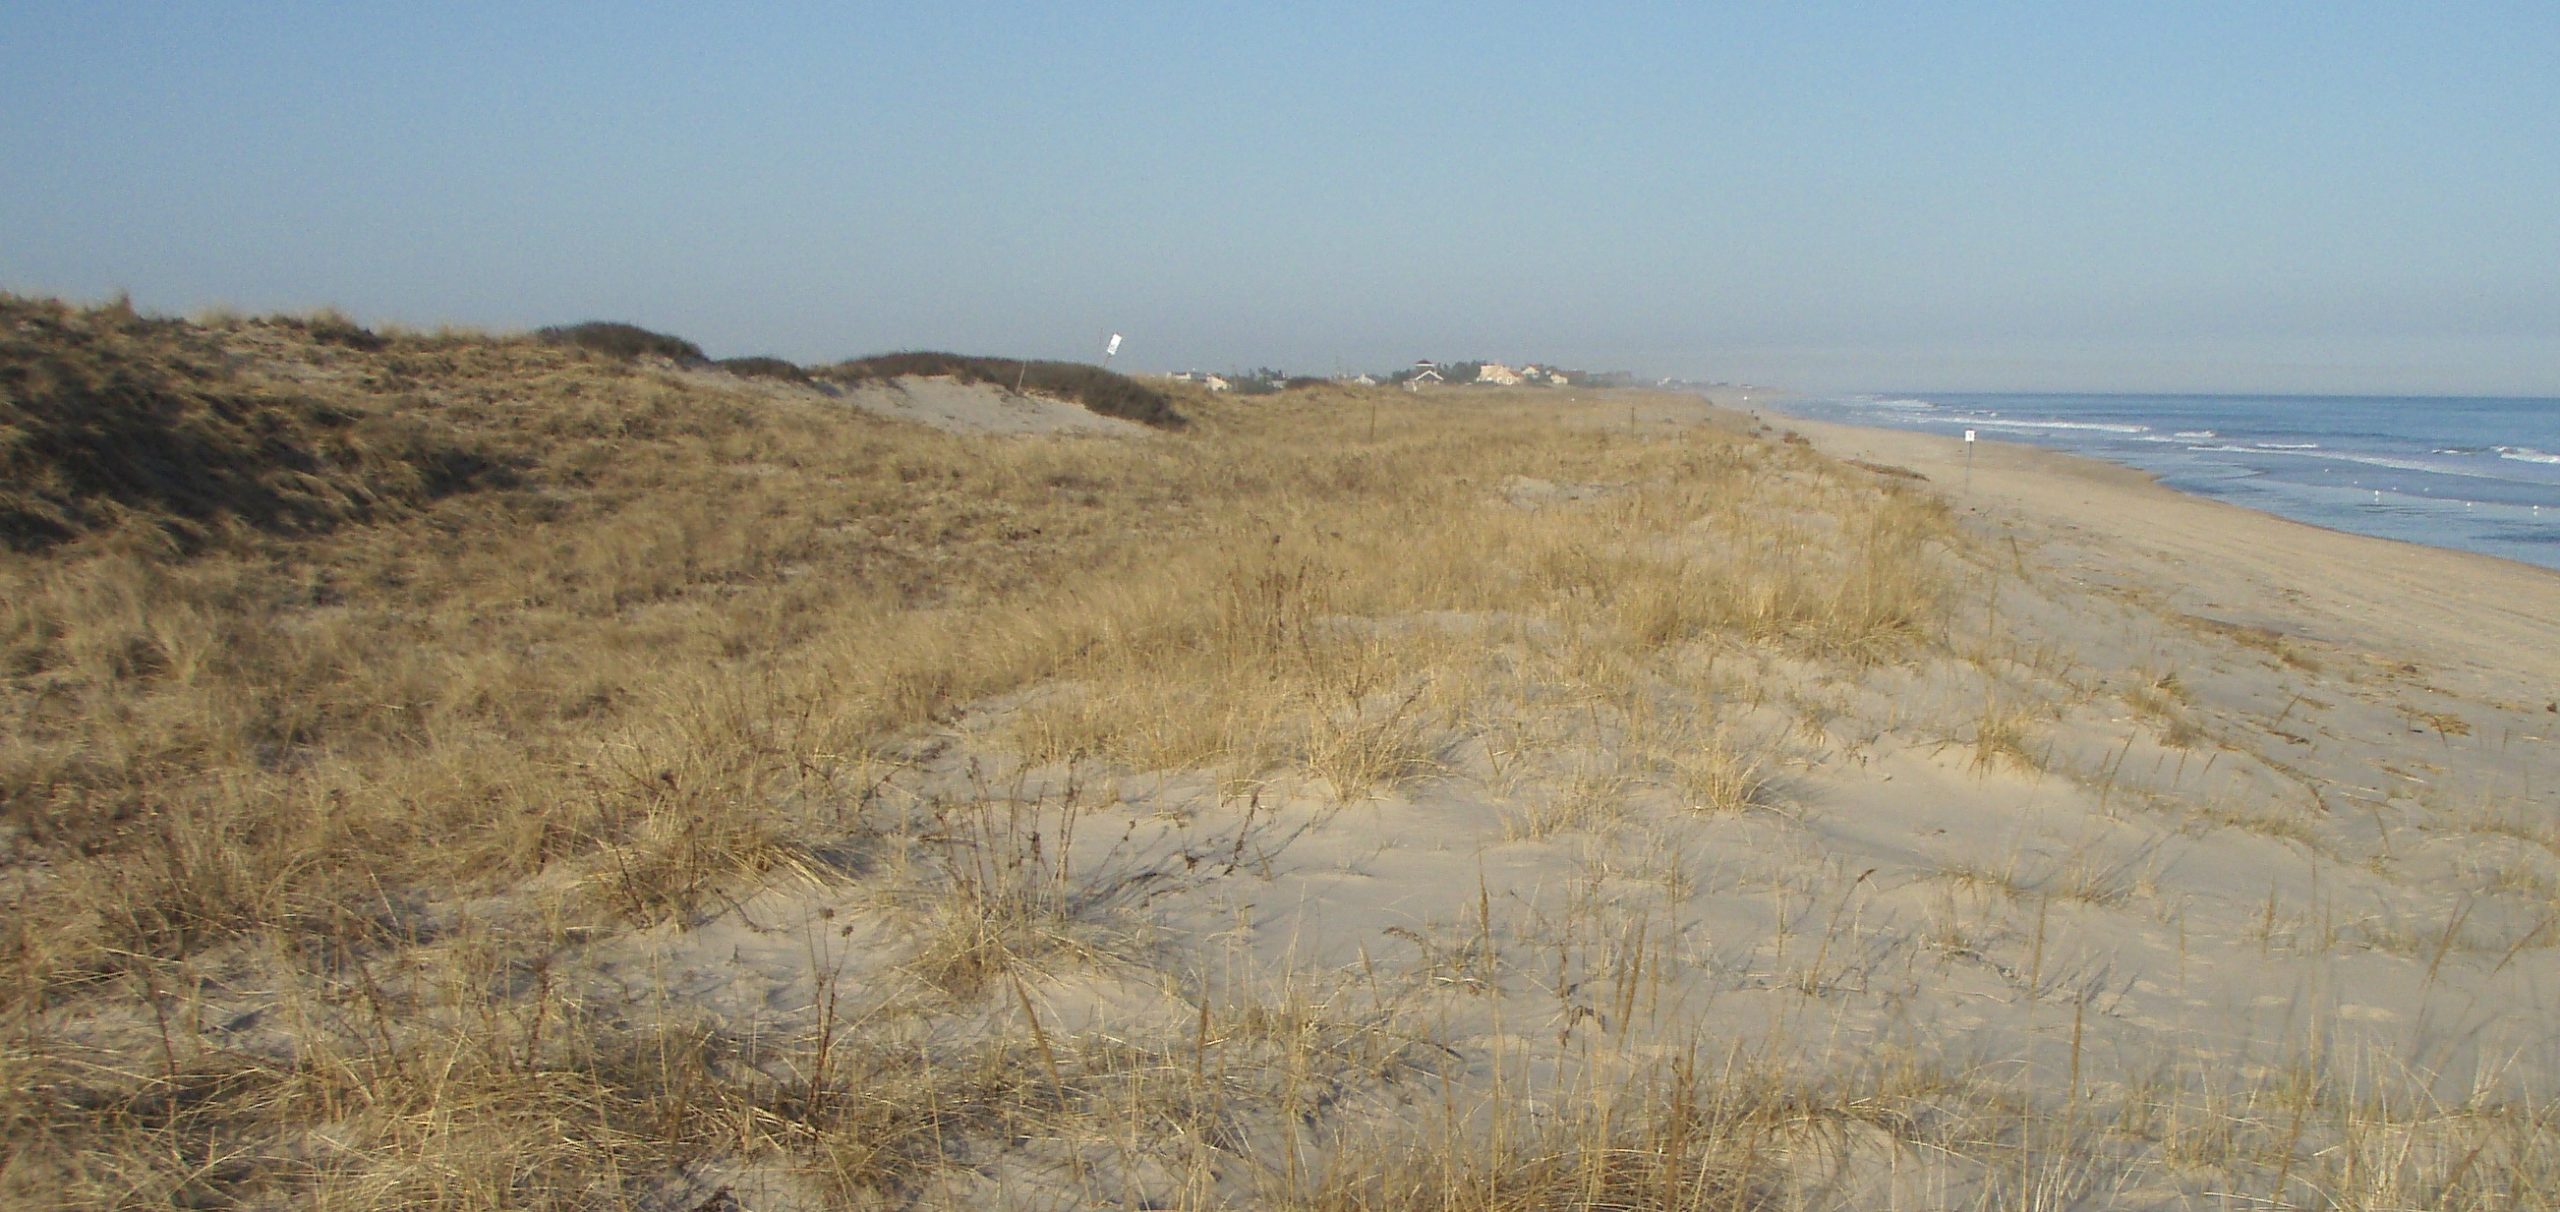 In some places, including this stretch of ocean beach in Amagansett, the shoreline and dune system has been accreting. 